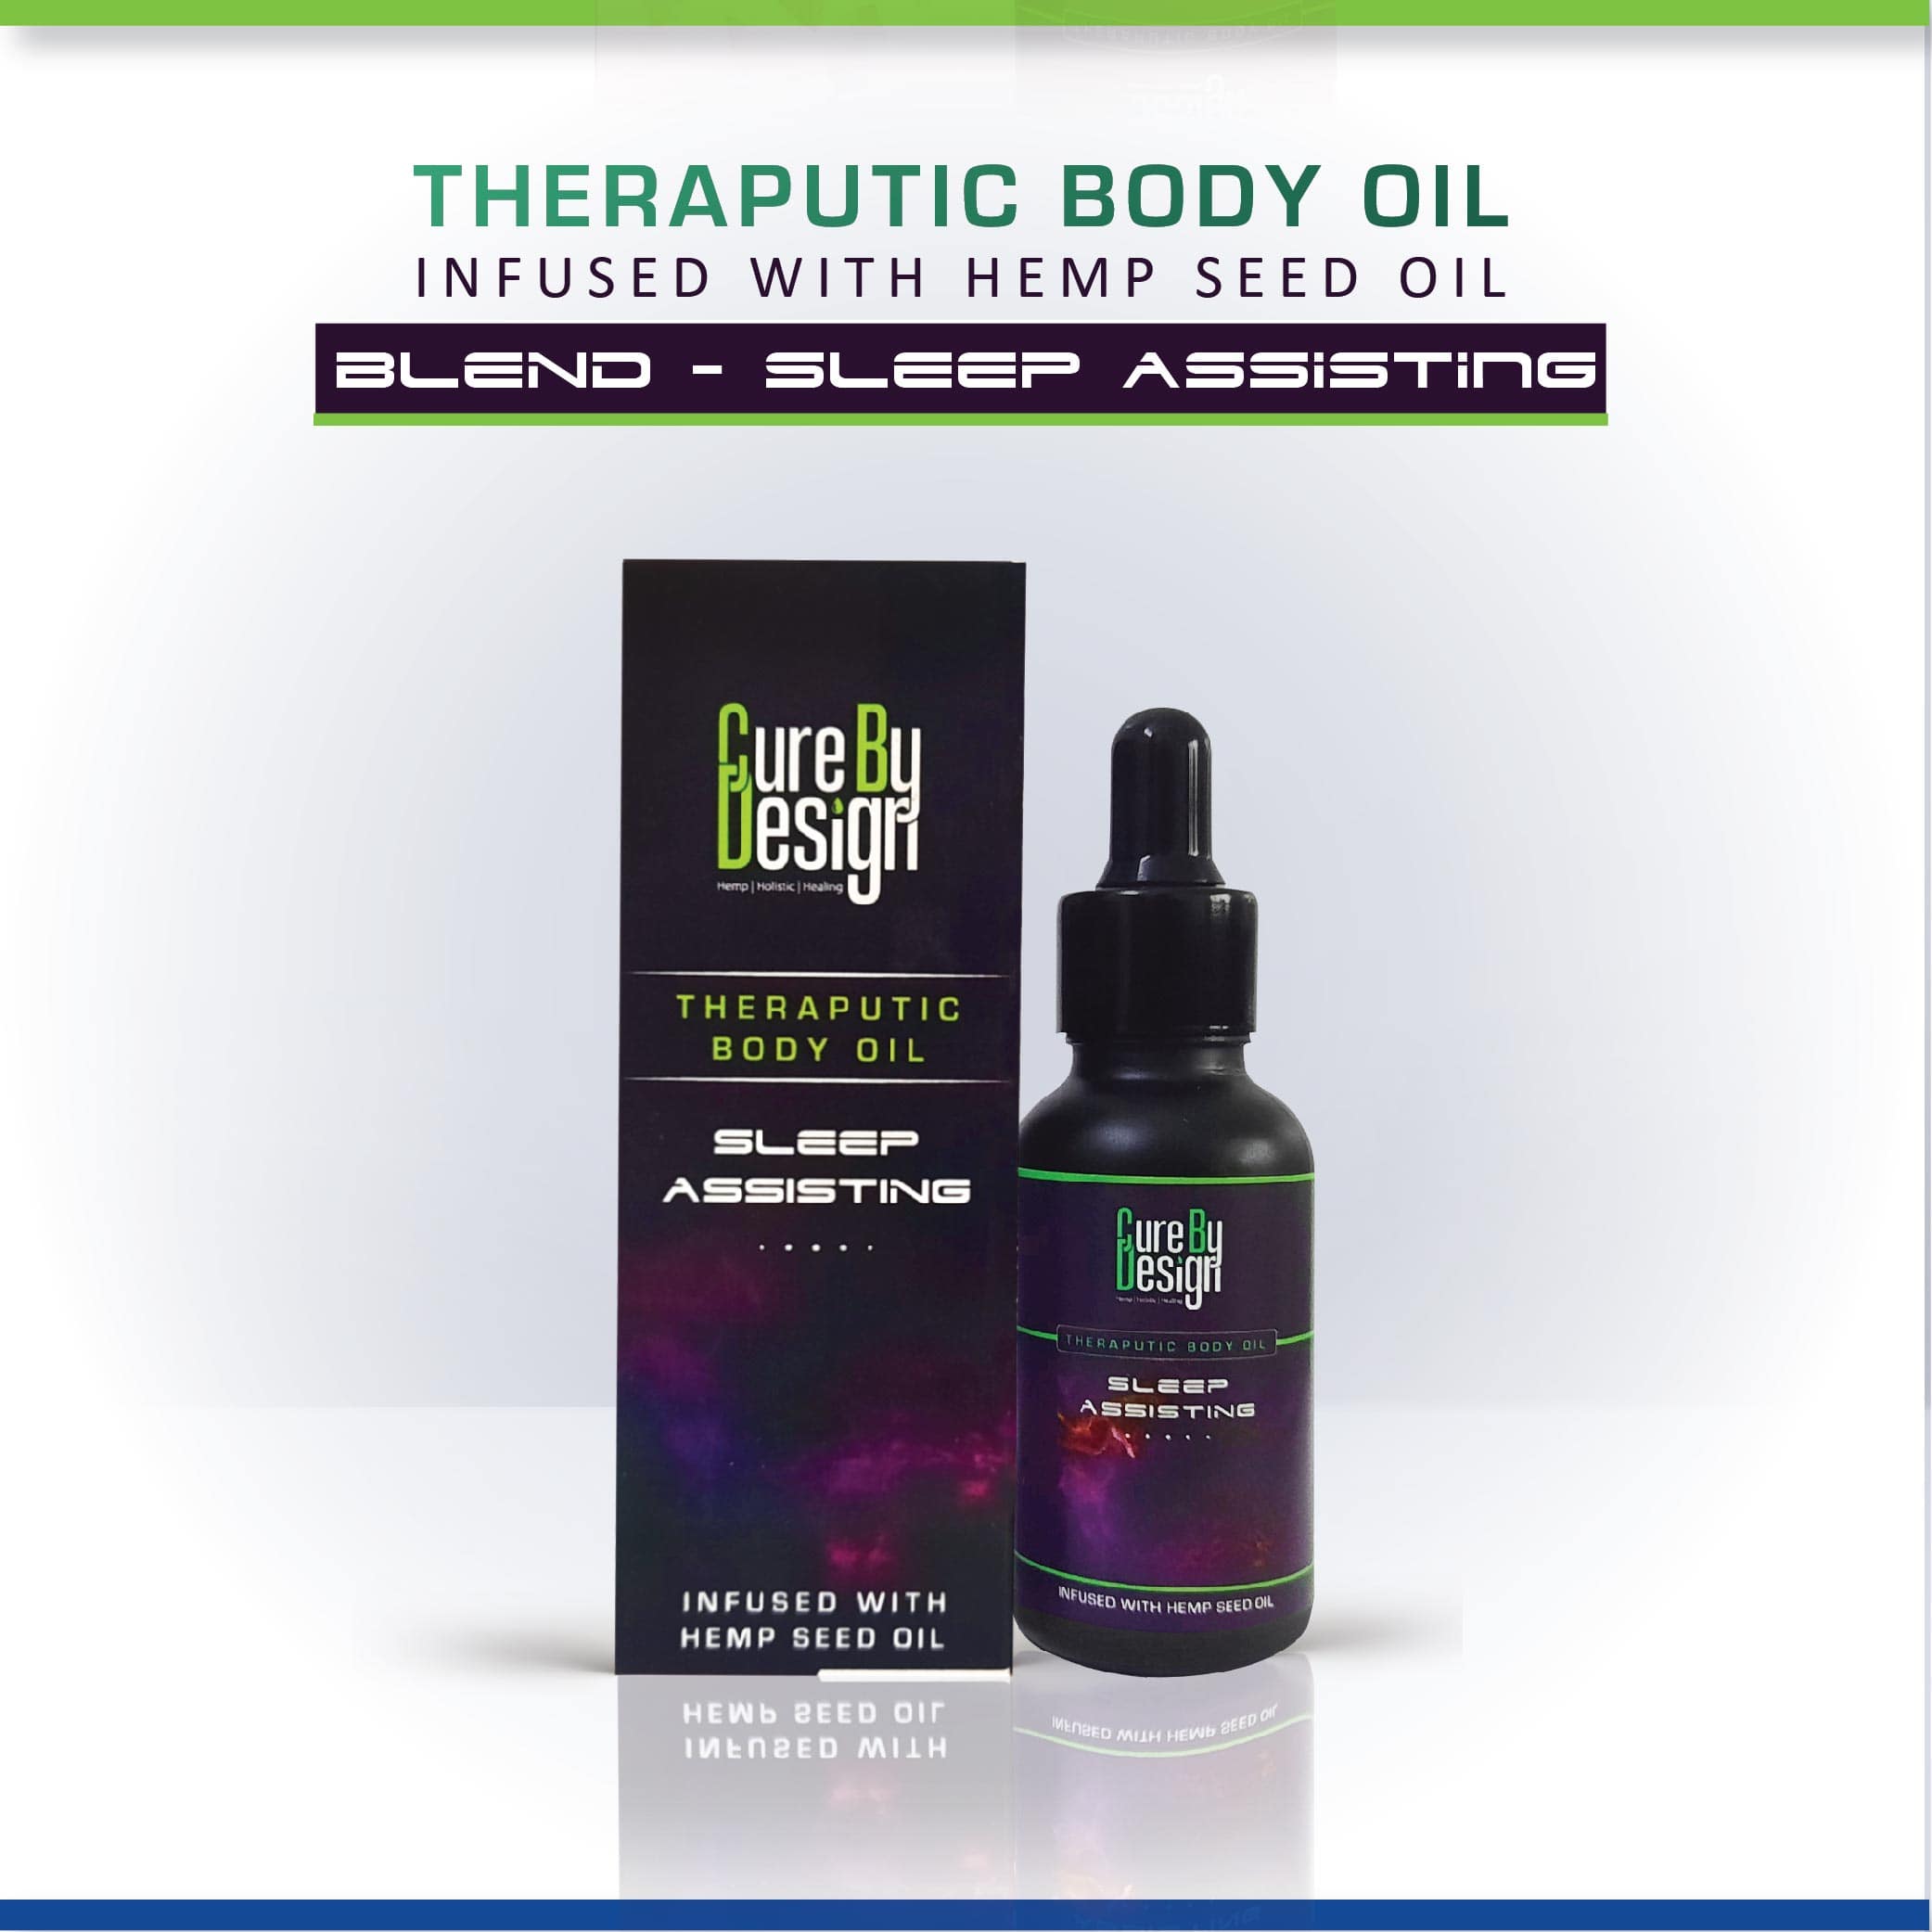 Cure By Design Theraputic Body Oil Infused with Hemp Seed Oil for Sleep Assisting